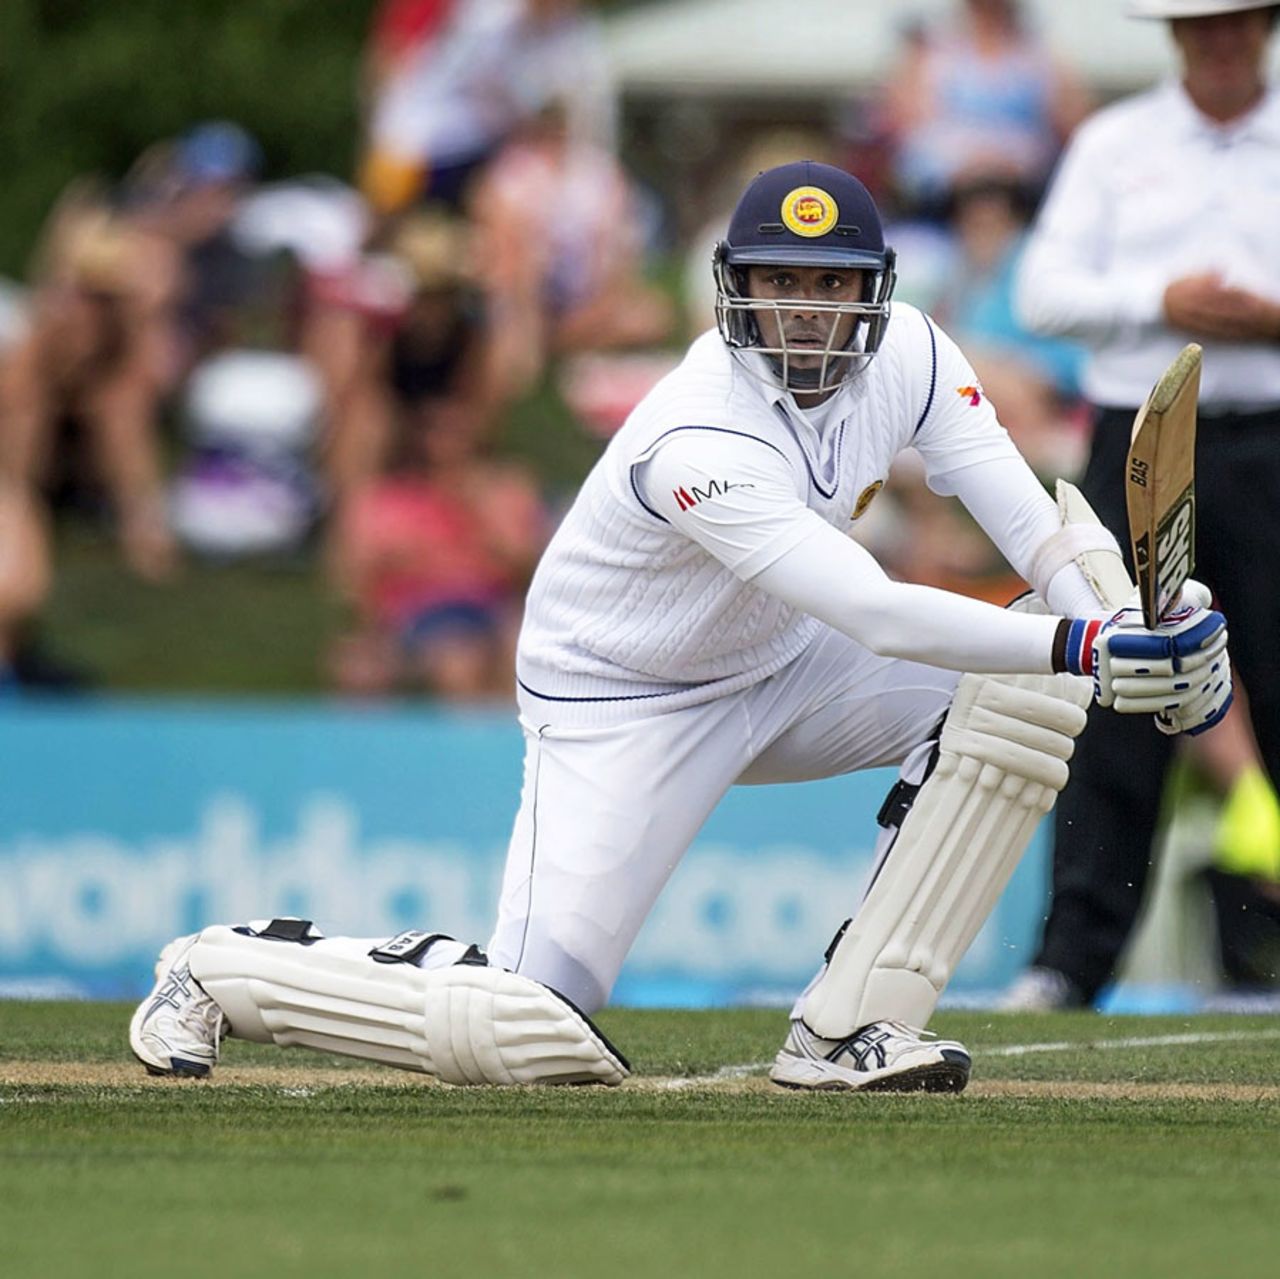 Angelo Mathews plays a drive through the off side during his knock of 50, New Zealand v Sri Lanka, 1st Test, Christchurch, 2nd day, December 27, 2014